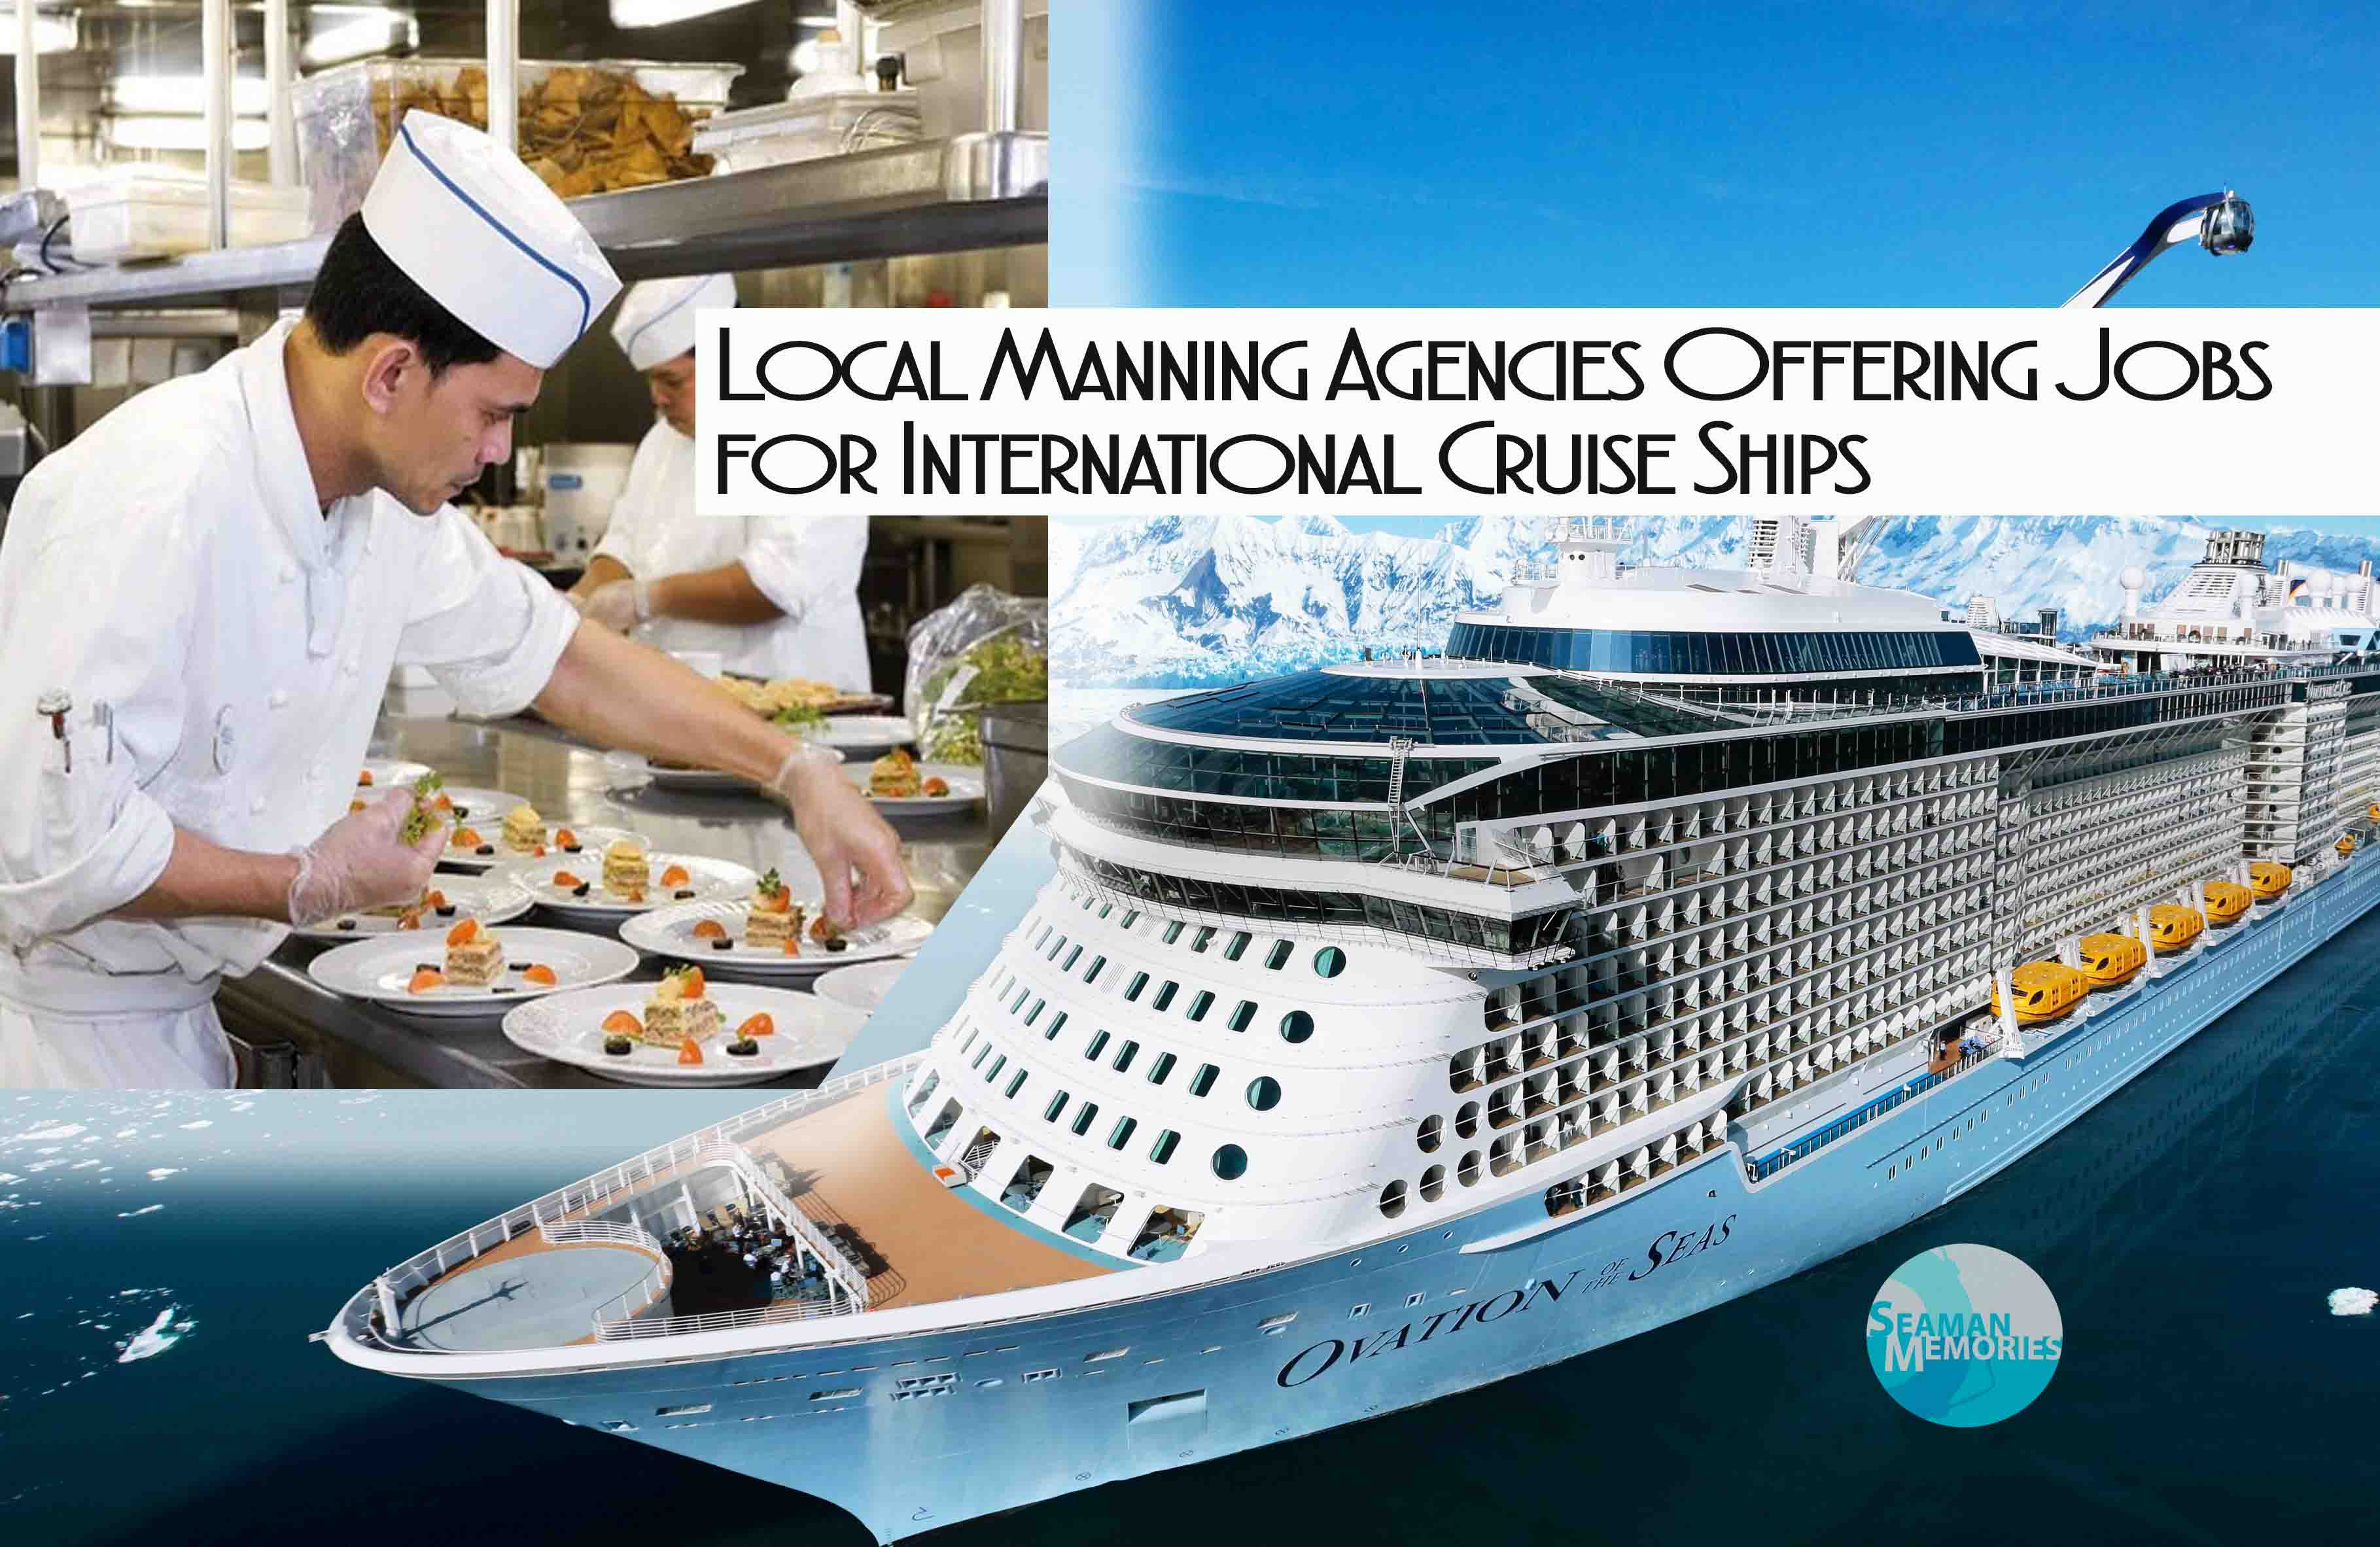 cruise line industry jobs